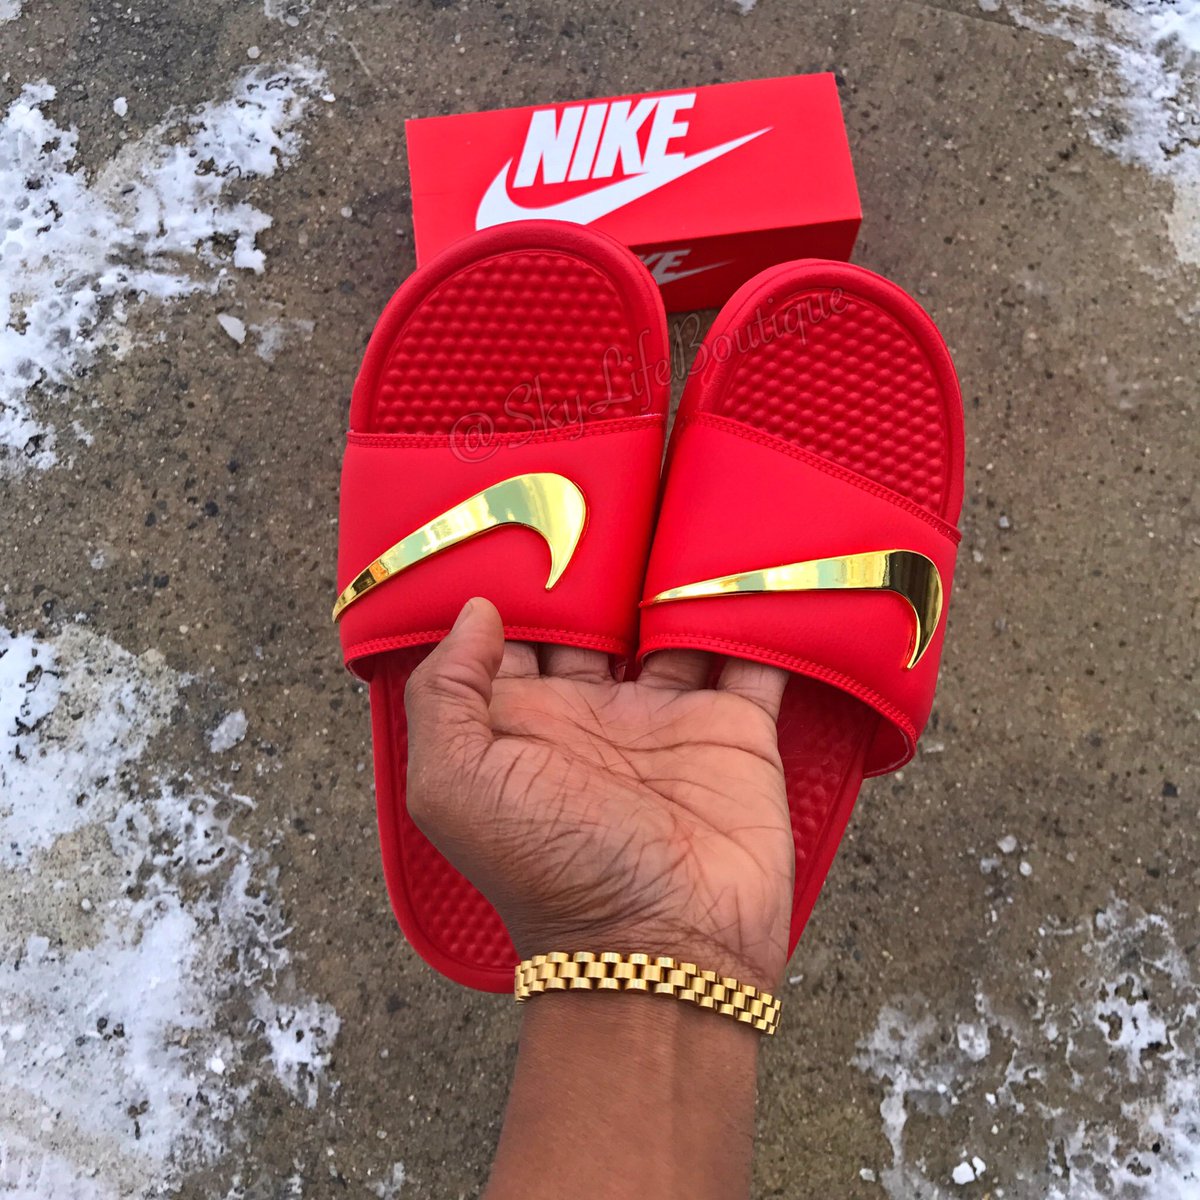 black nike slides with gold check